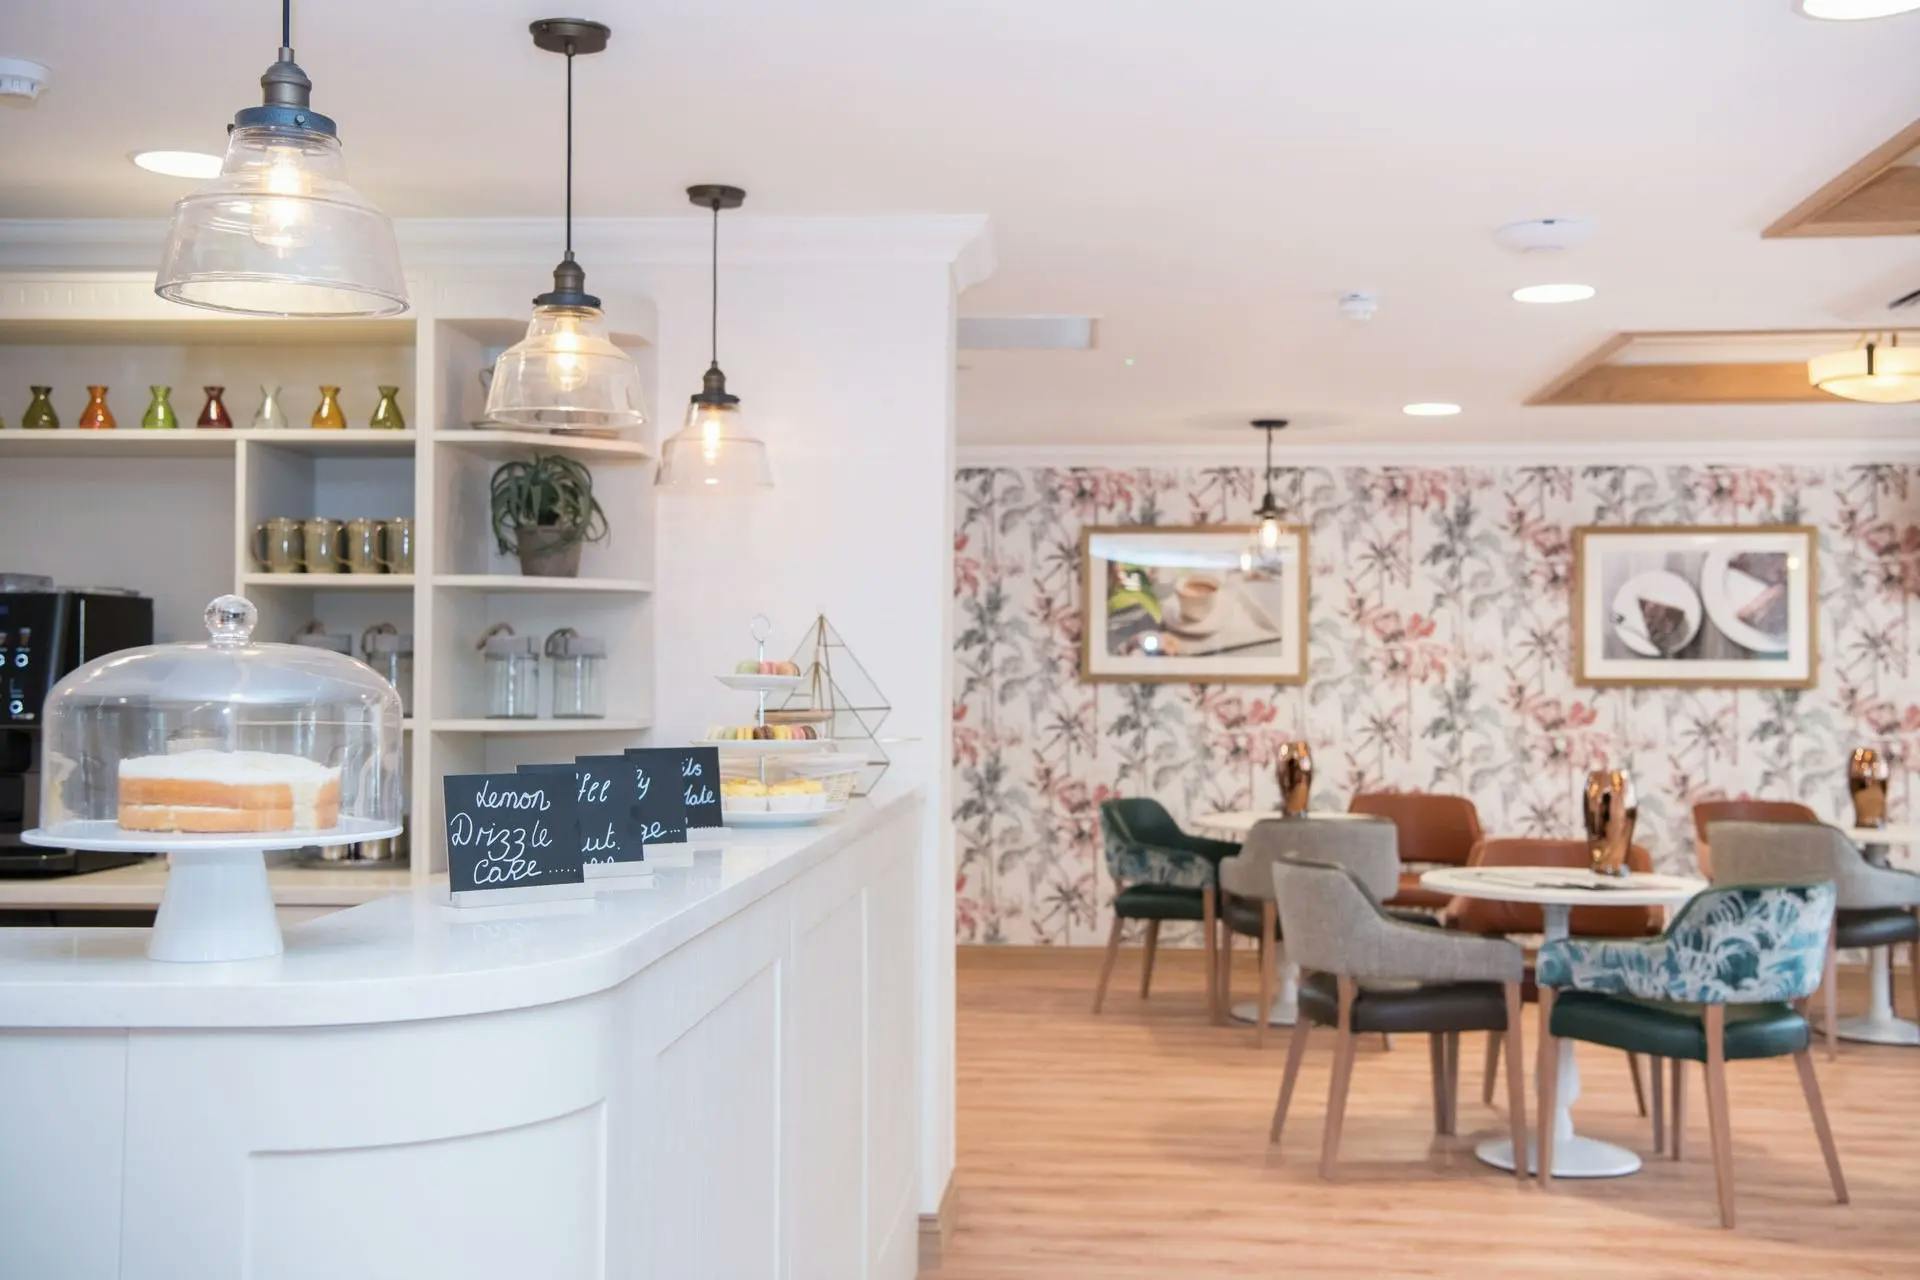 Cafe/Restaurant at Brook House Care Home in Towcester, Northamptonshire